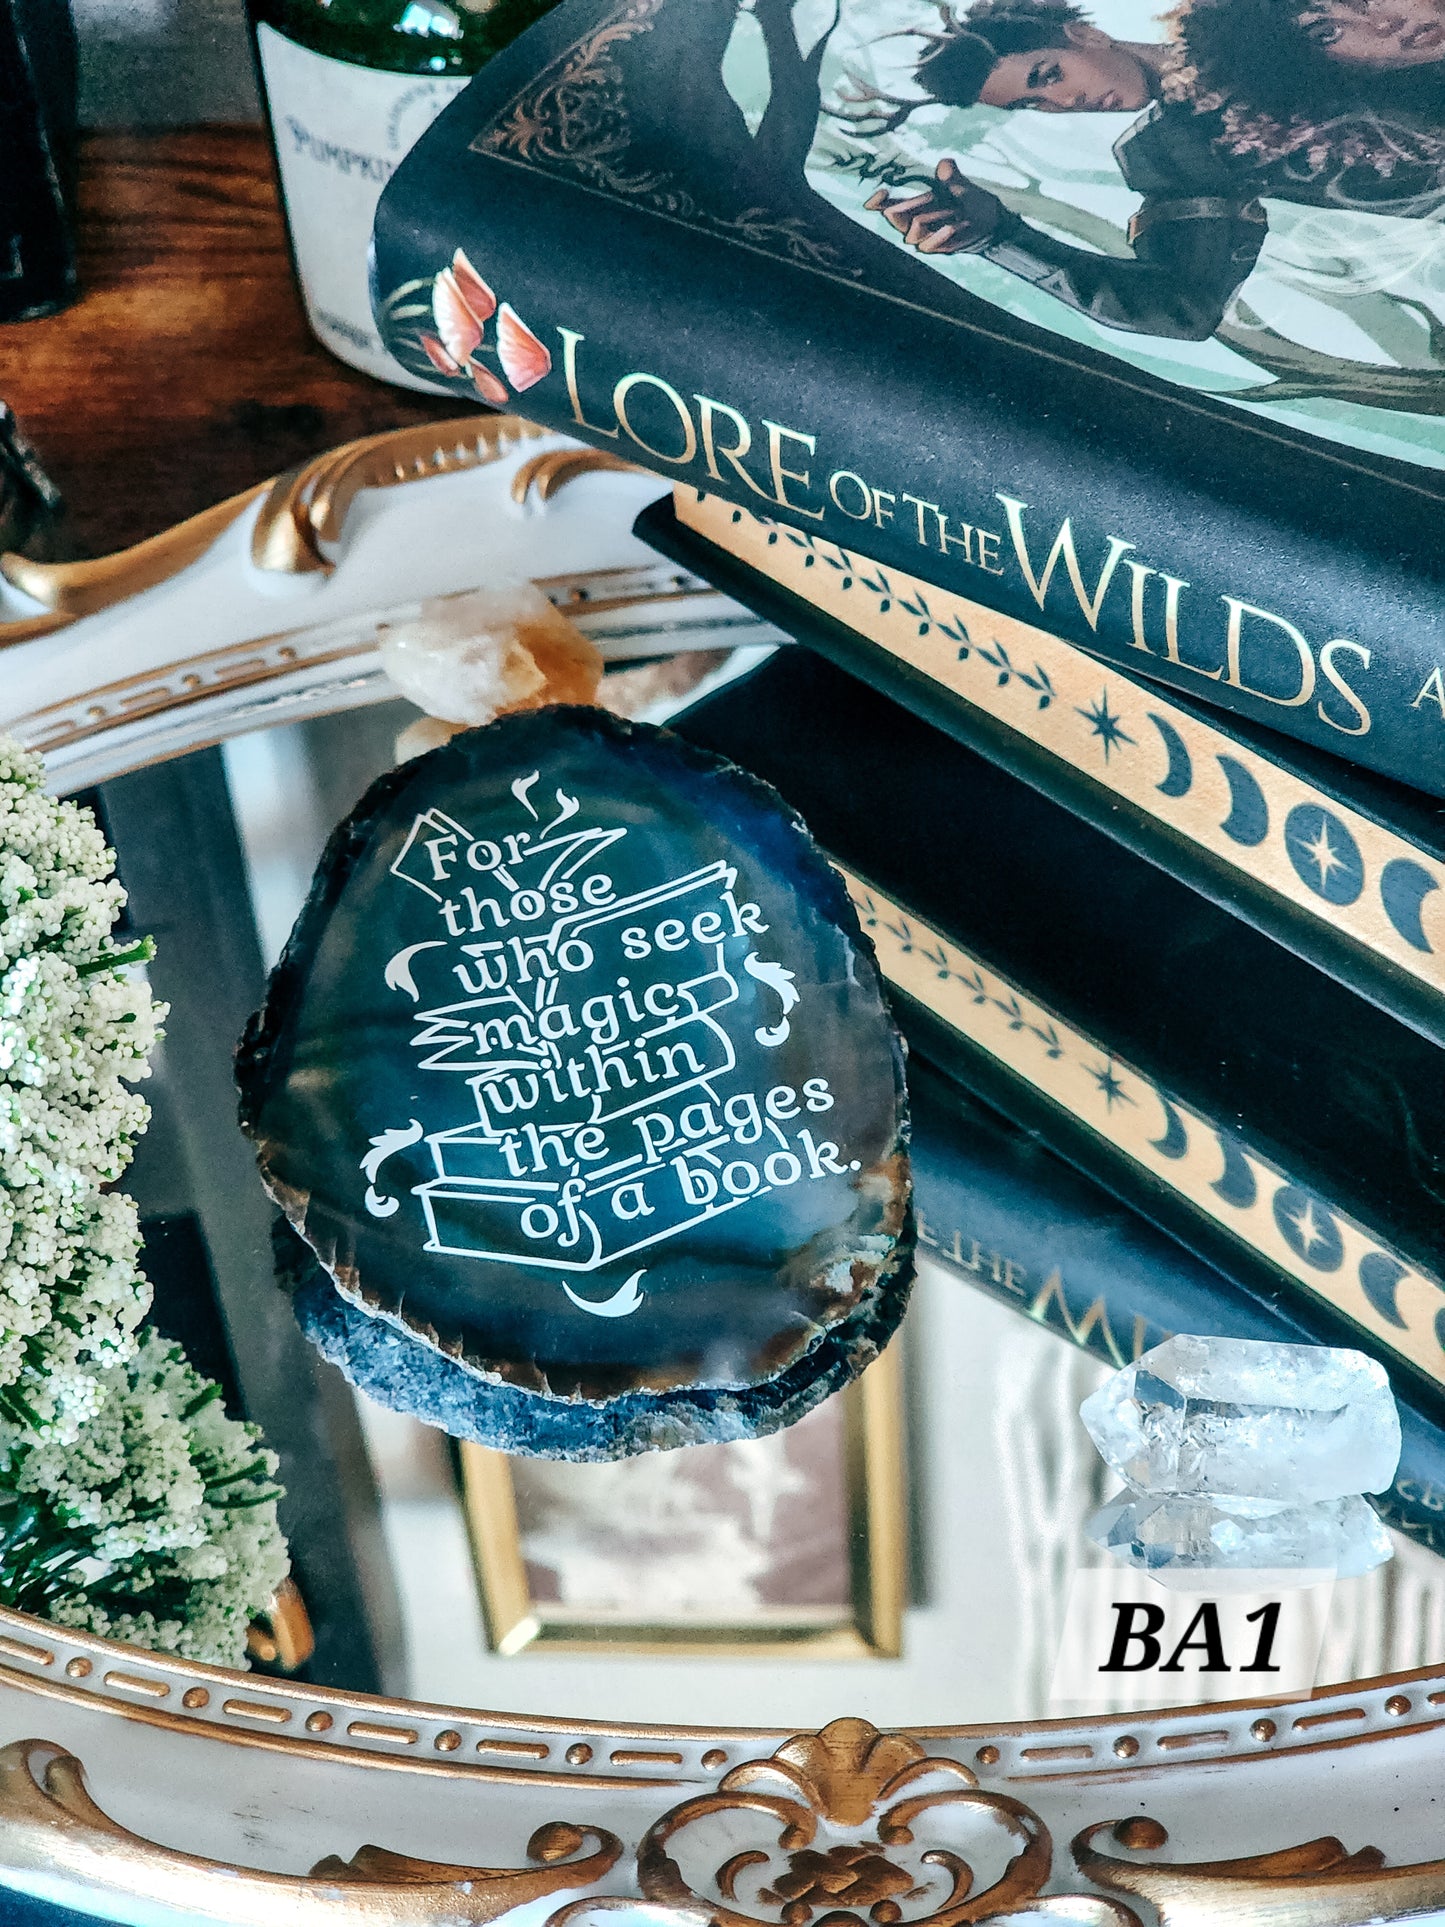 " For those who seek magic " | Blue Agate Slice Shelf Sitter | Lore Of the Wilds by Analeigh Sbrana